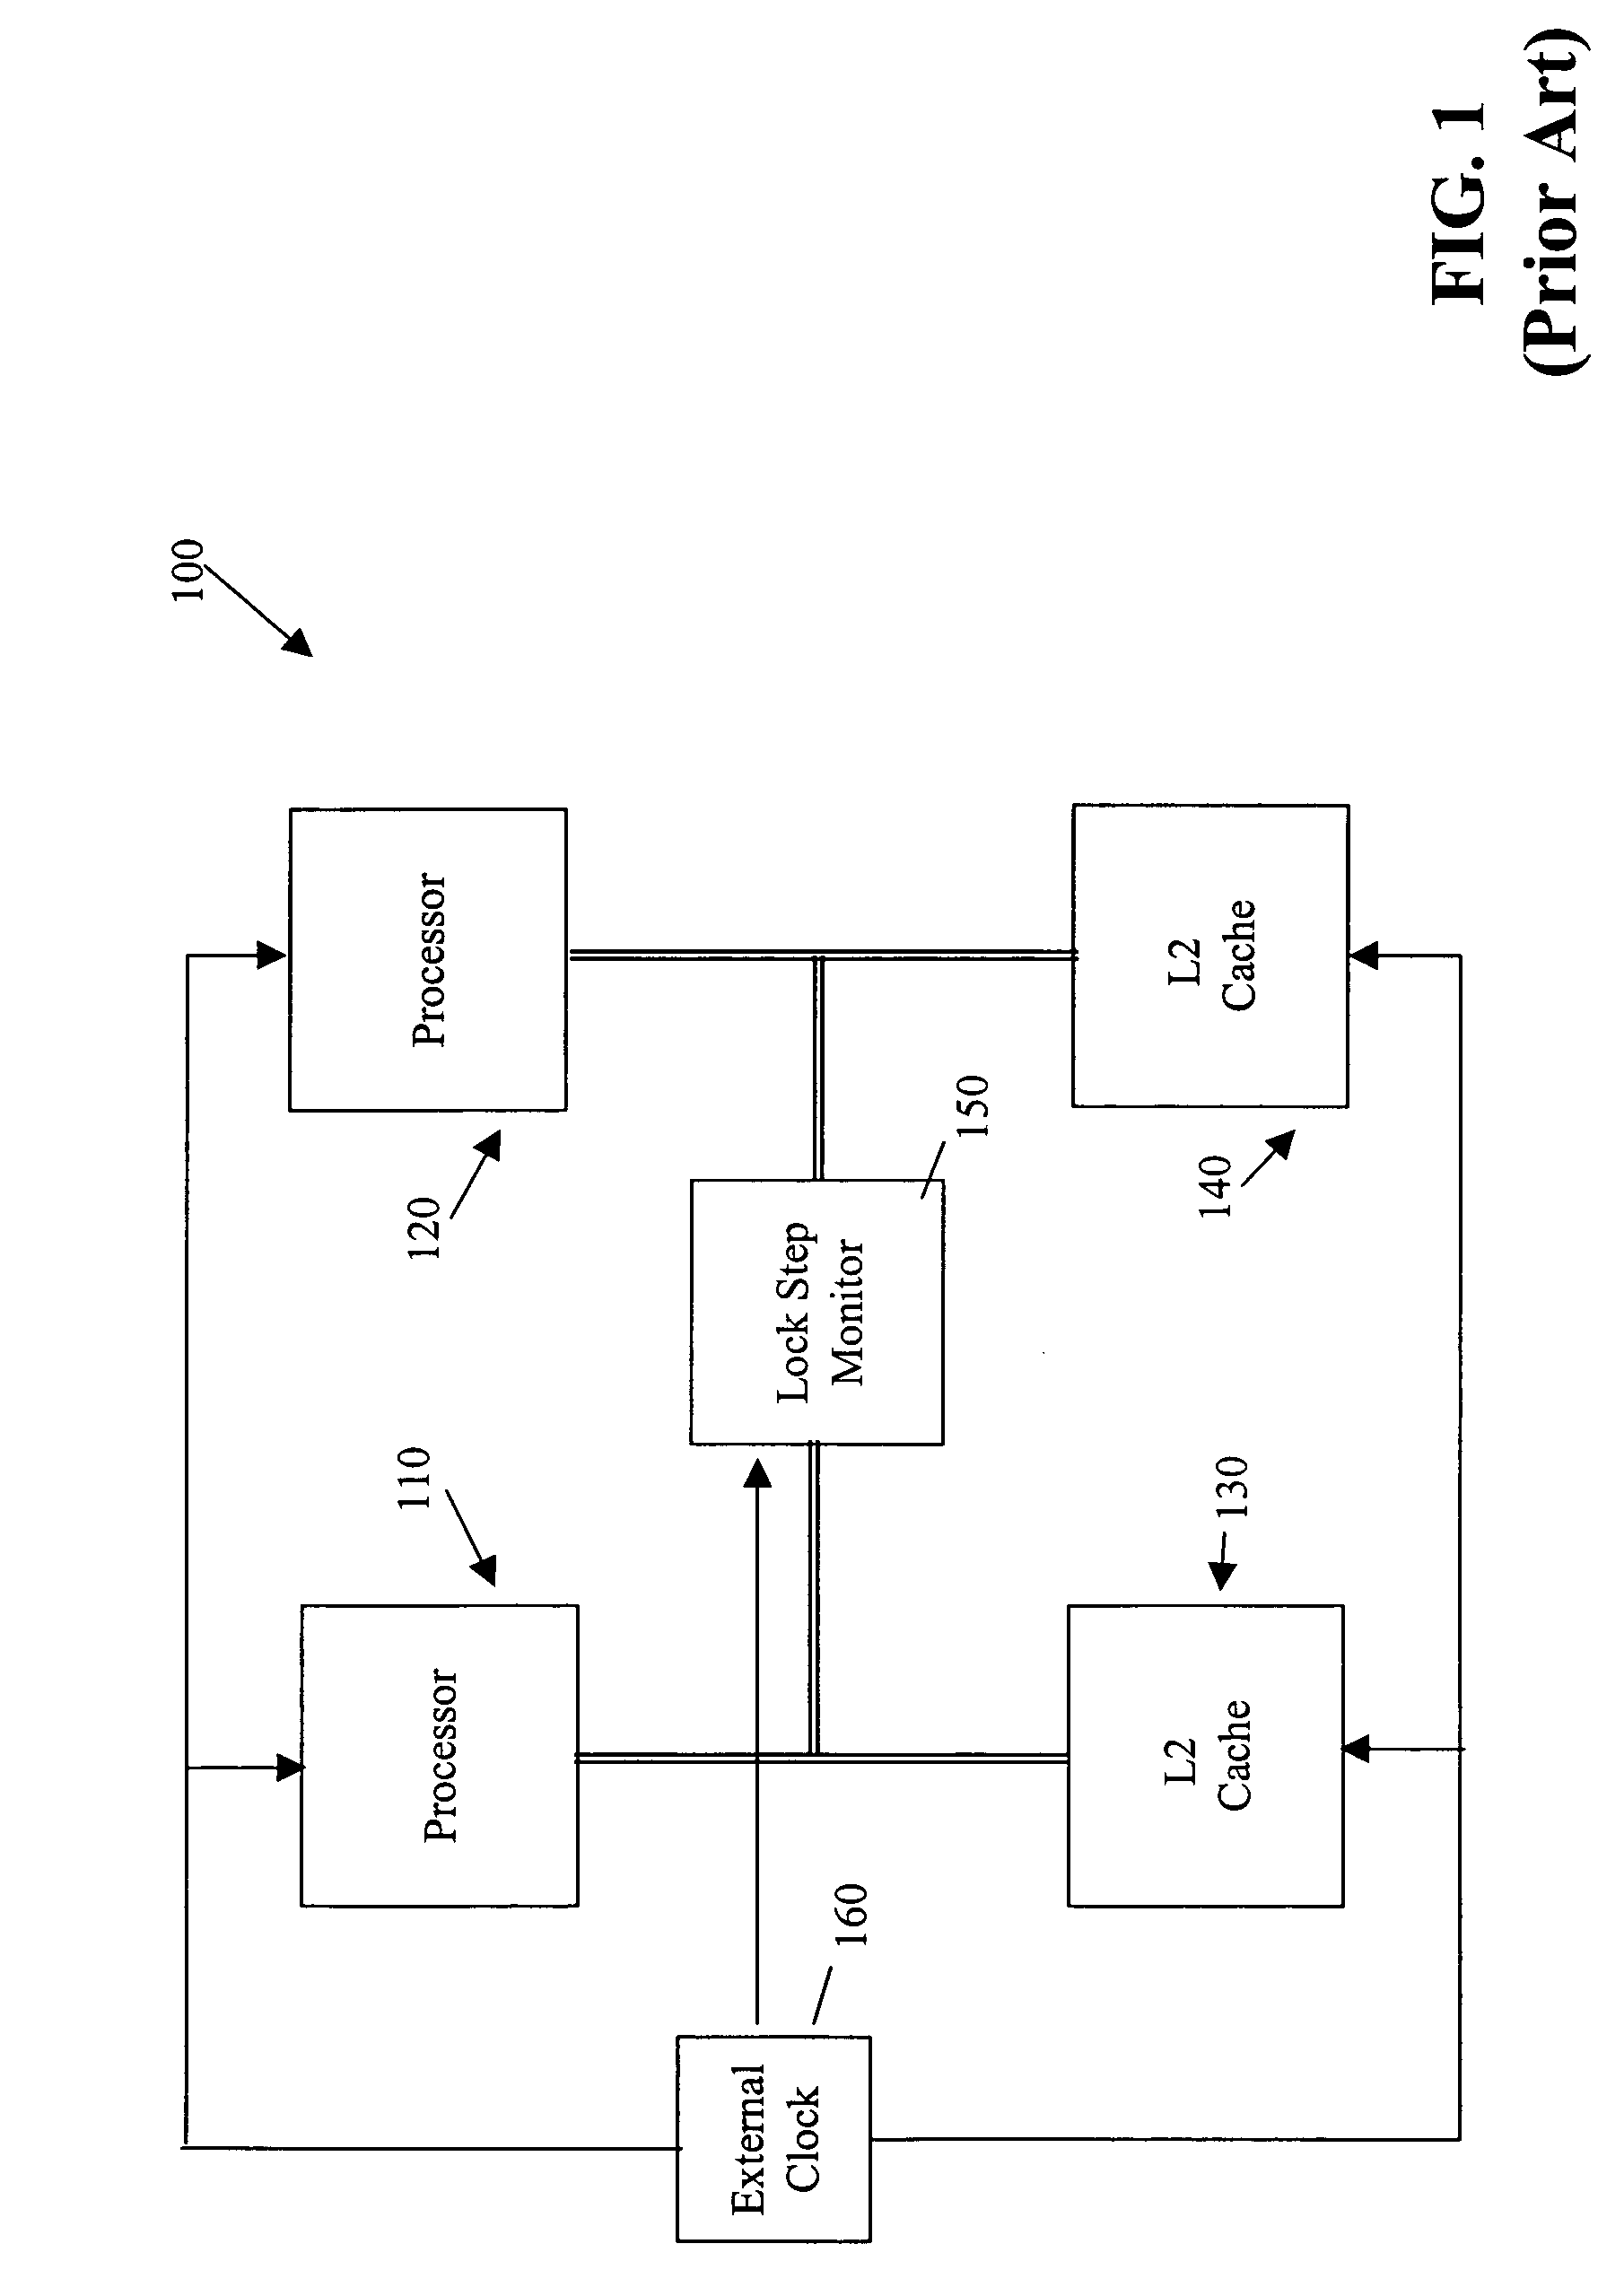 Logging of level-two cache transactions into banks of the level-two cache for system rollback